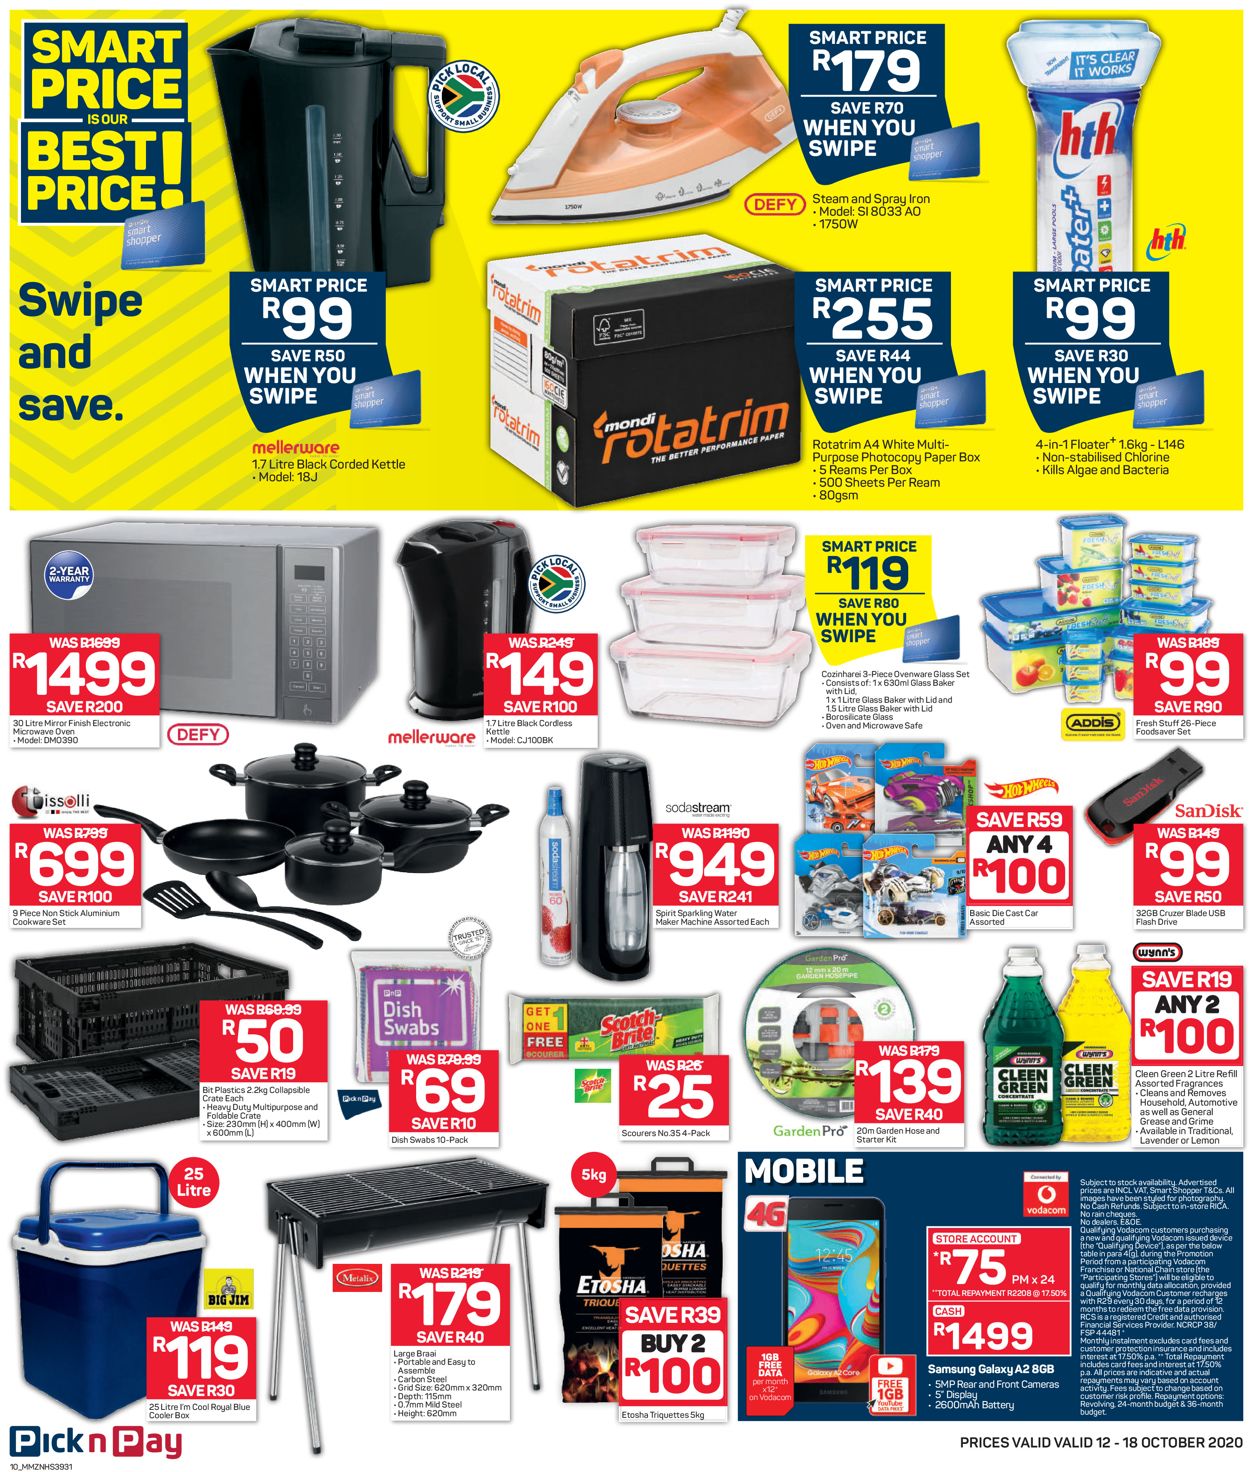 Pick n Pay Catalogue - 2020/10/12-2020/10/18 (Page 10)